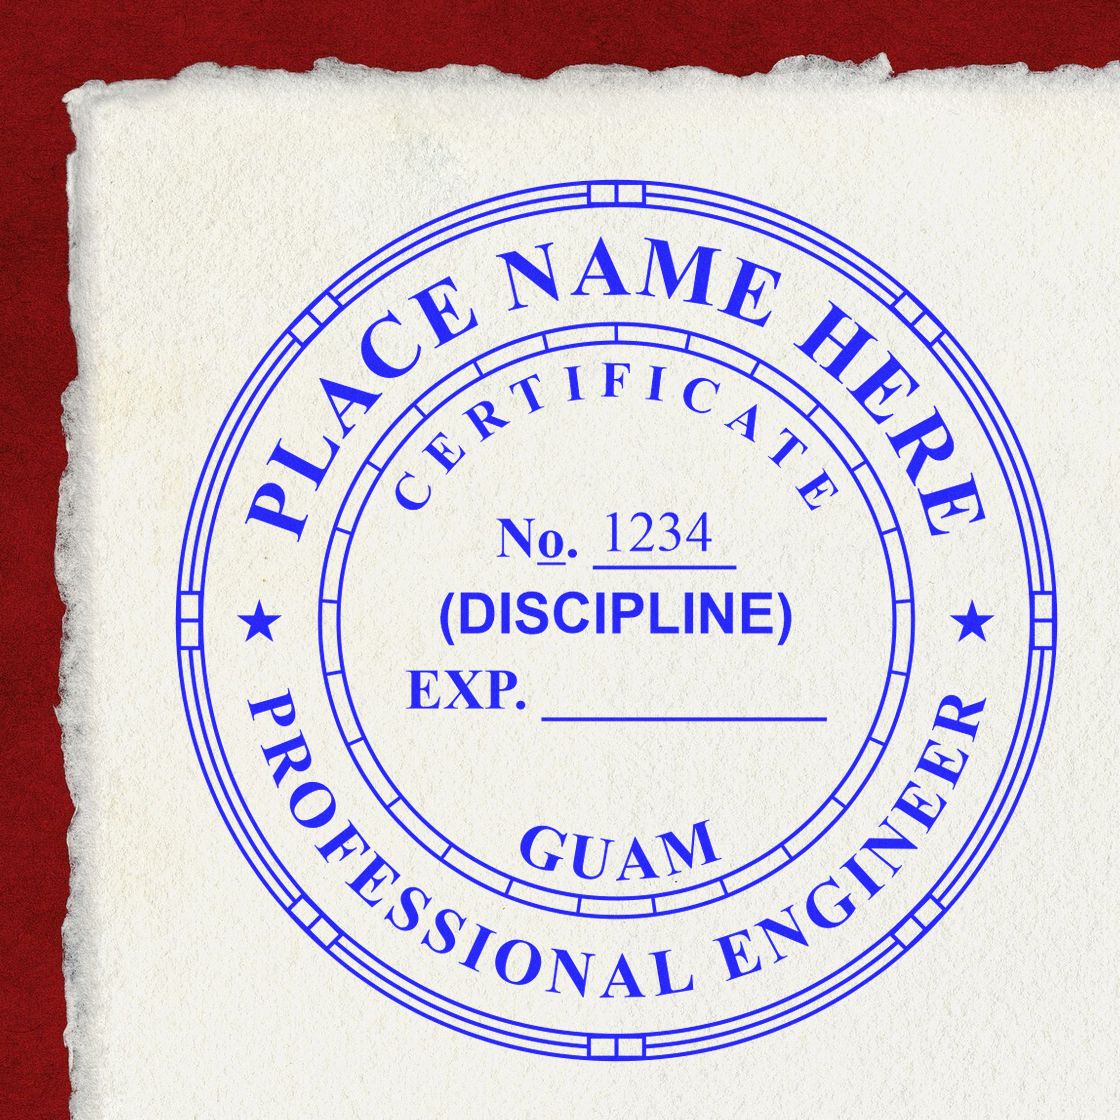 The Slim Pre-Inked Guam Professional Engineer Seal Stamp stamp impression comes to life with a crisp, detailed photo on paper - showcasing true professional quality.